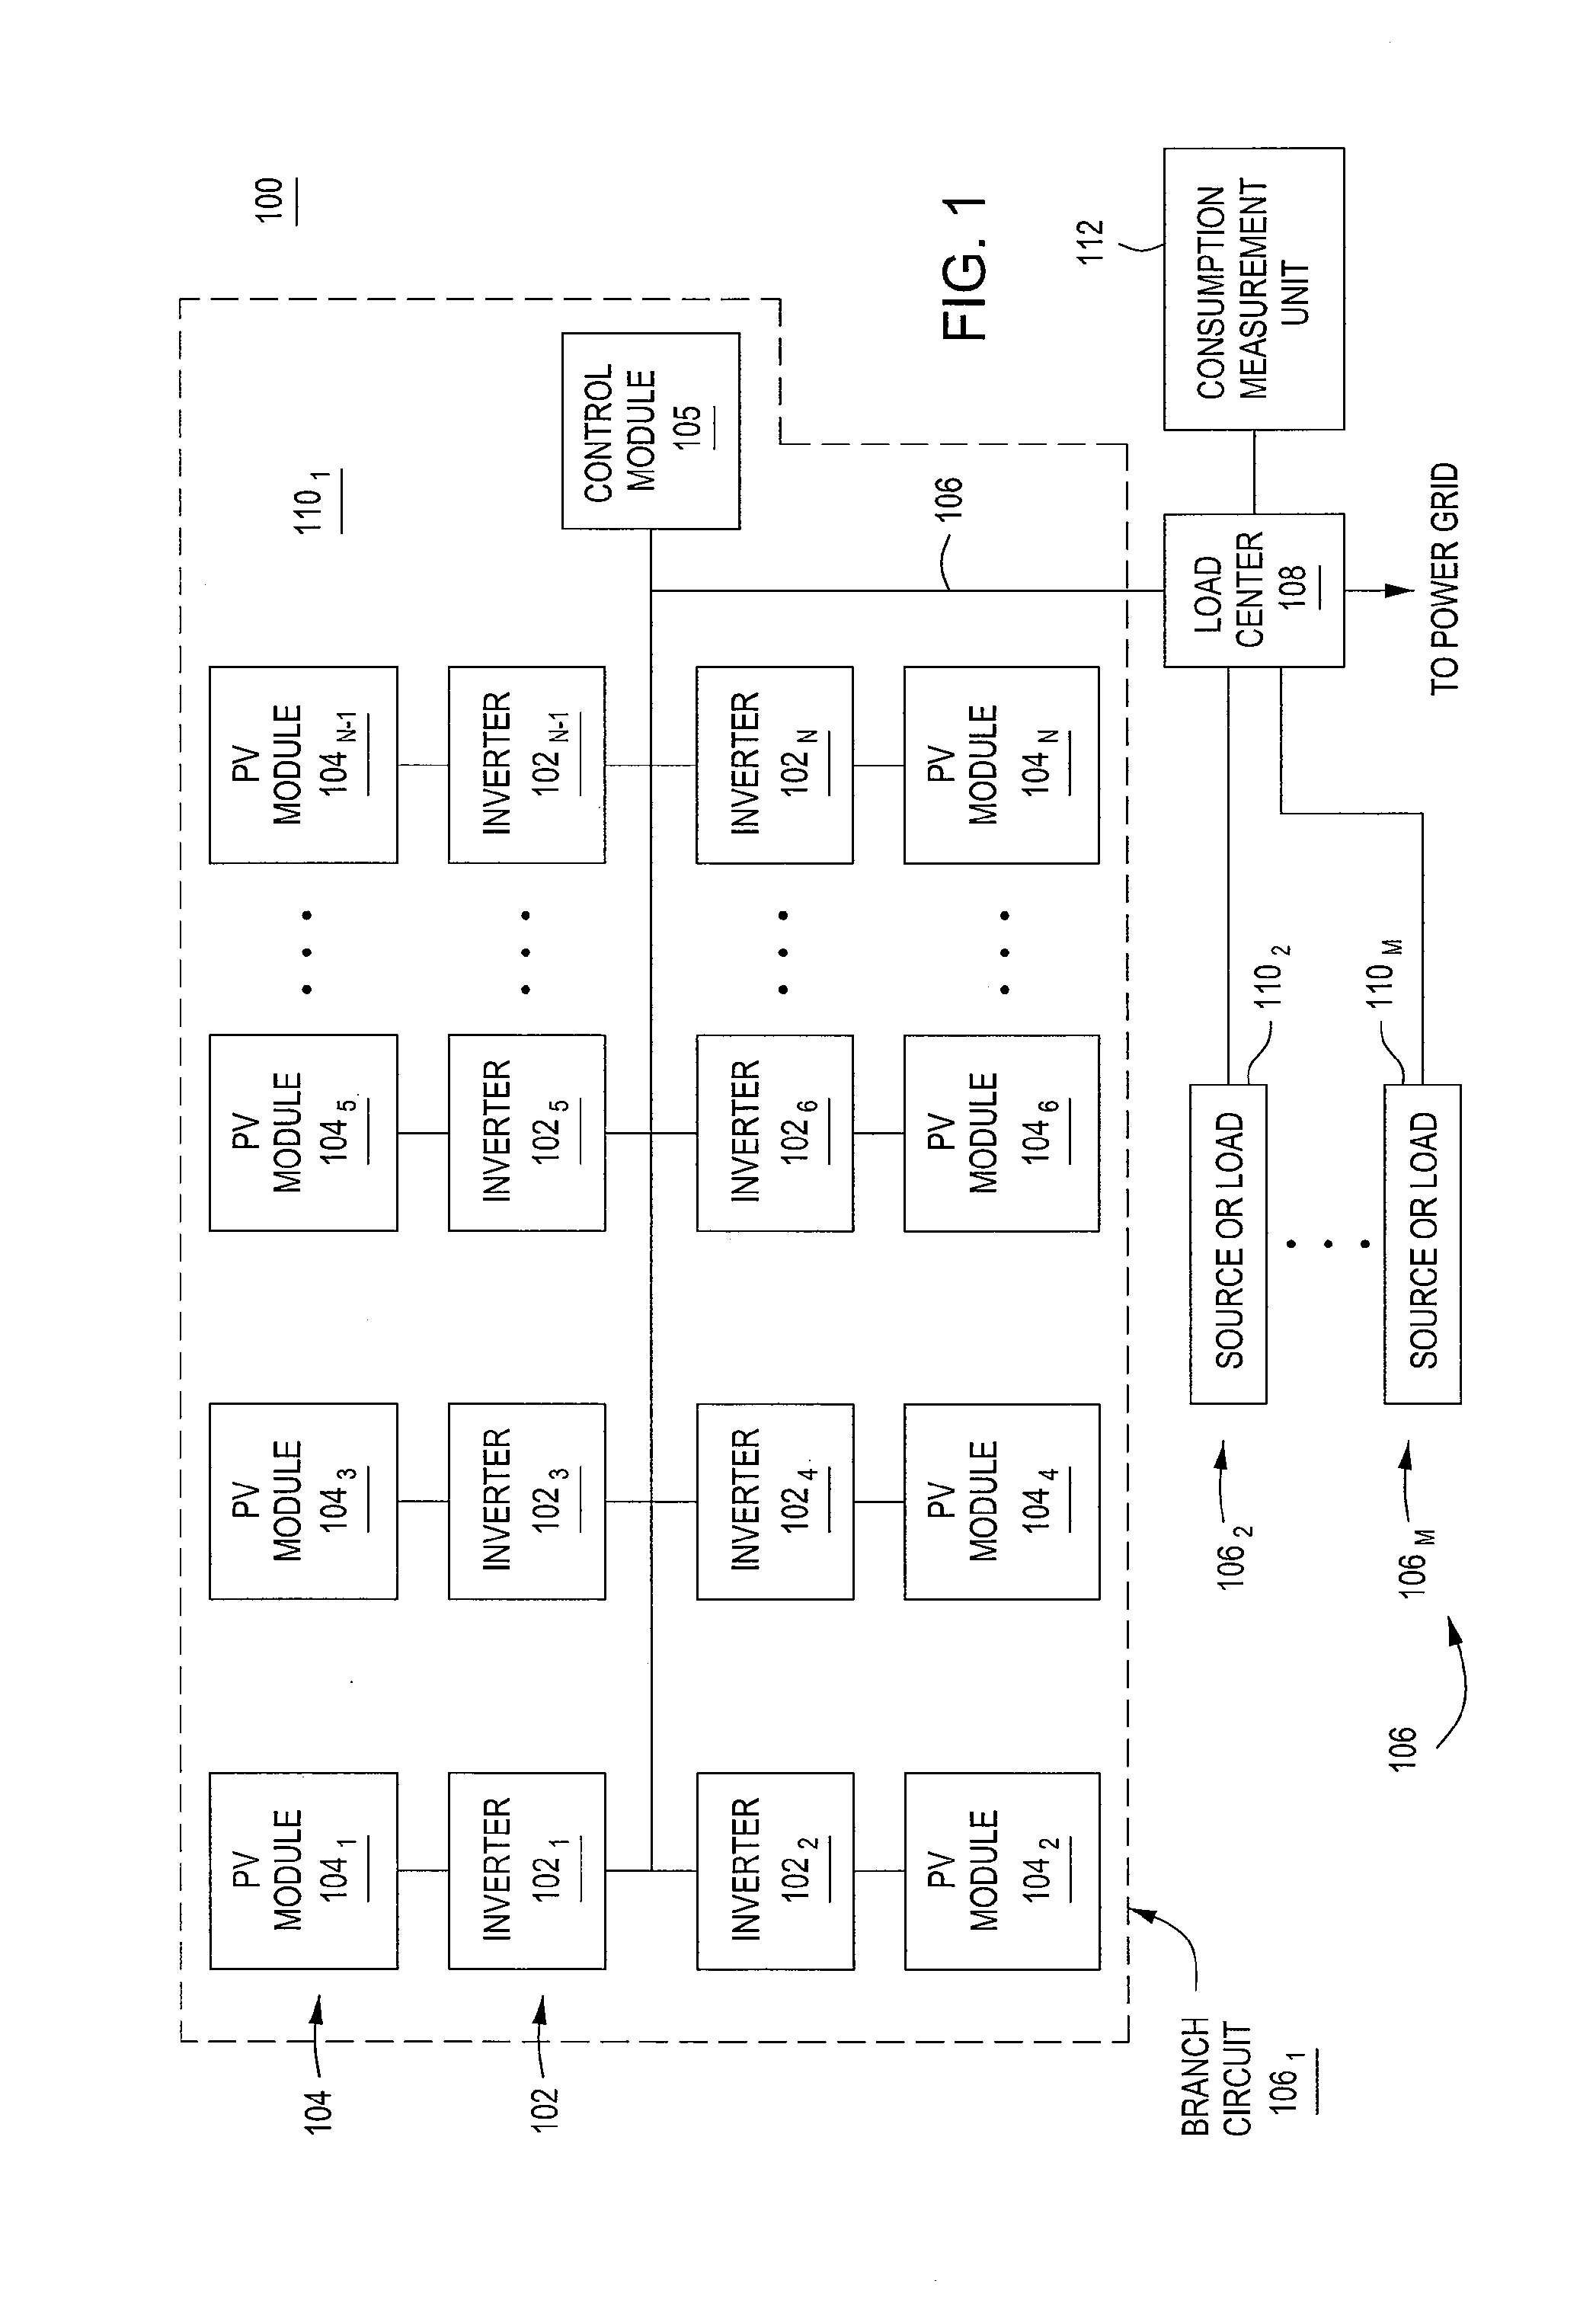 Method and apparatus for characterizing a circuit coupled to an AC line